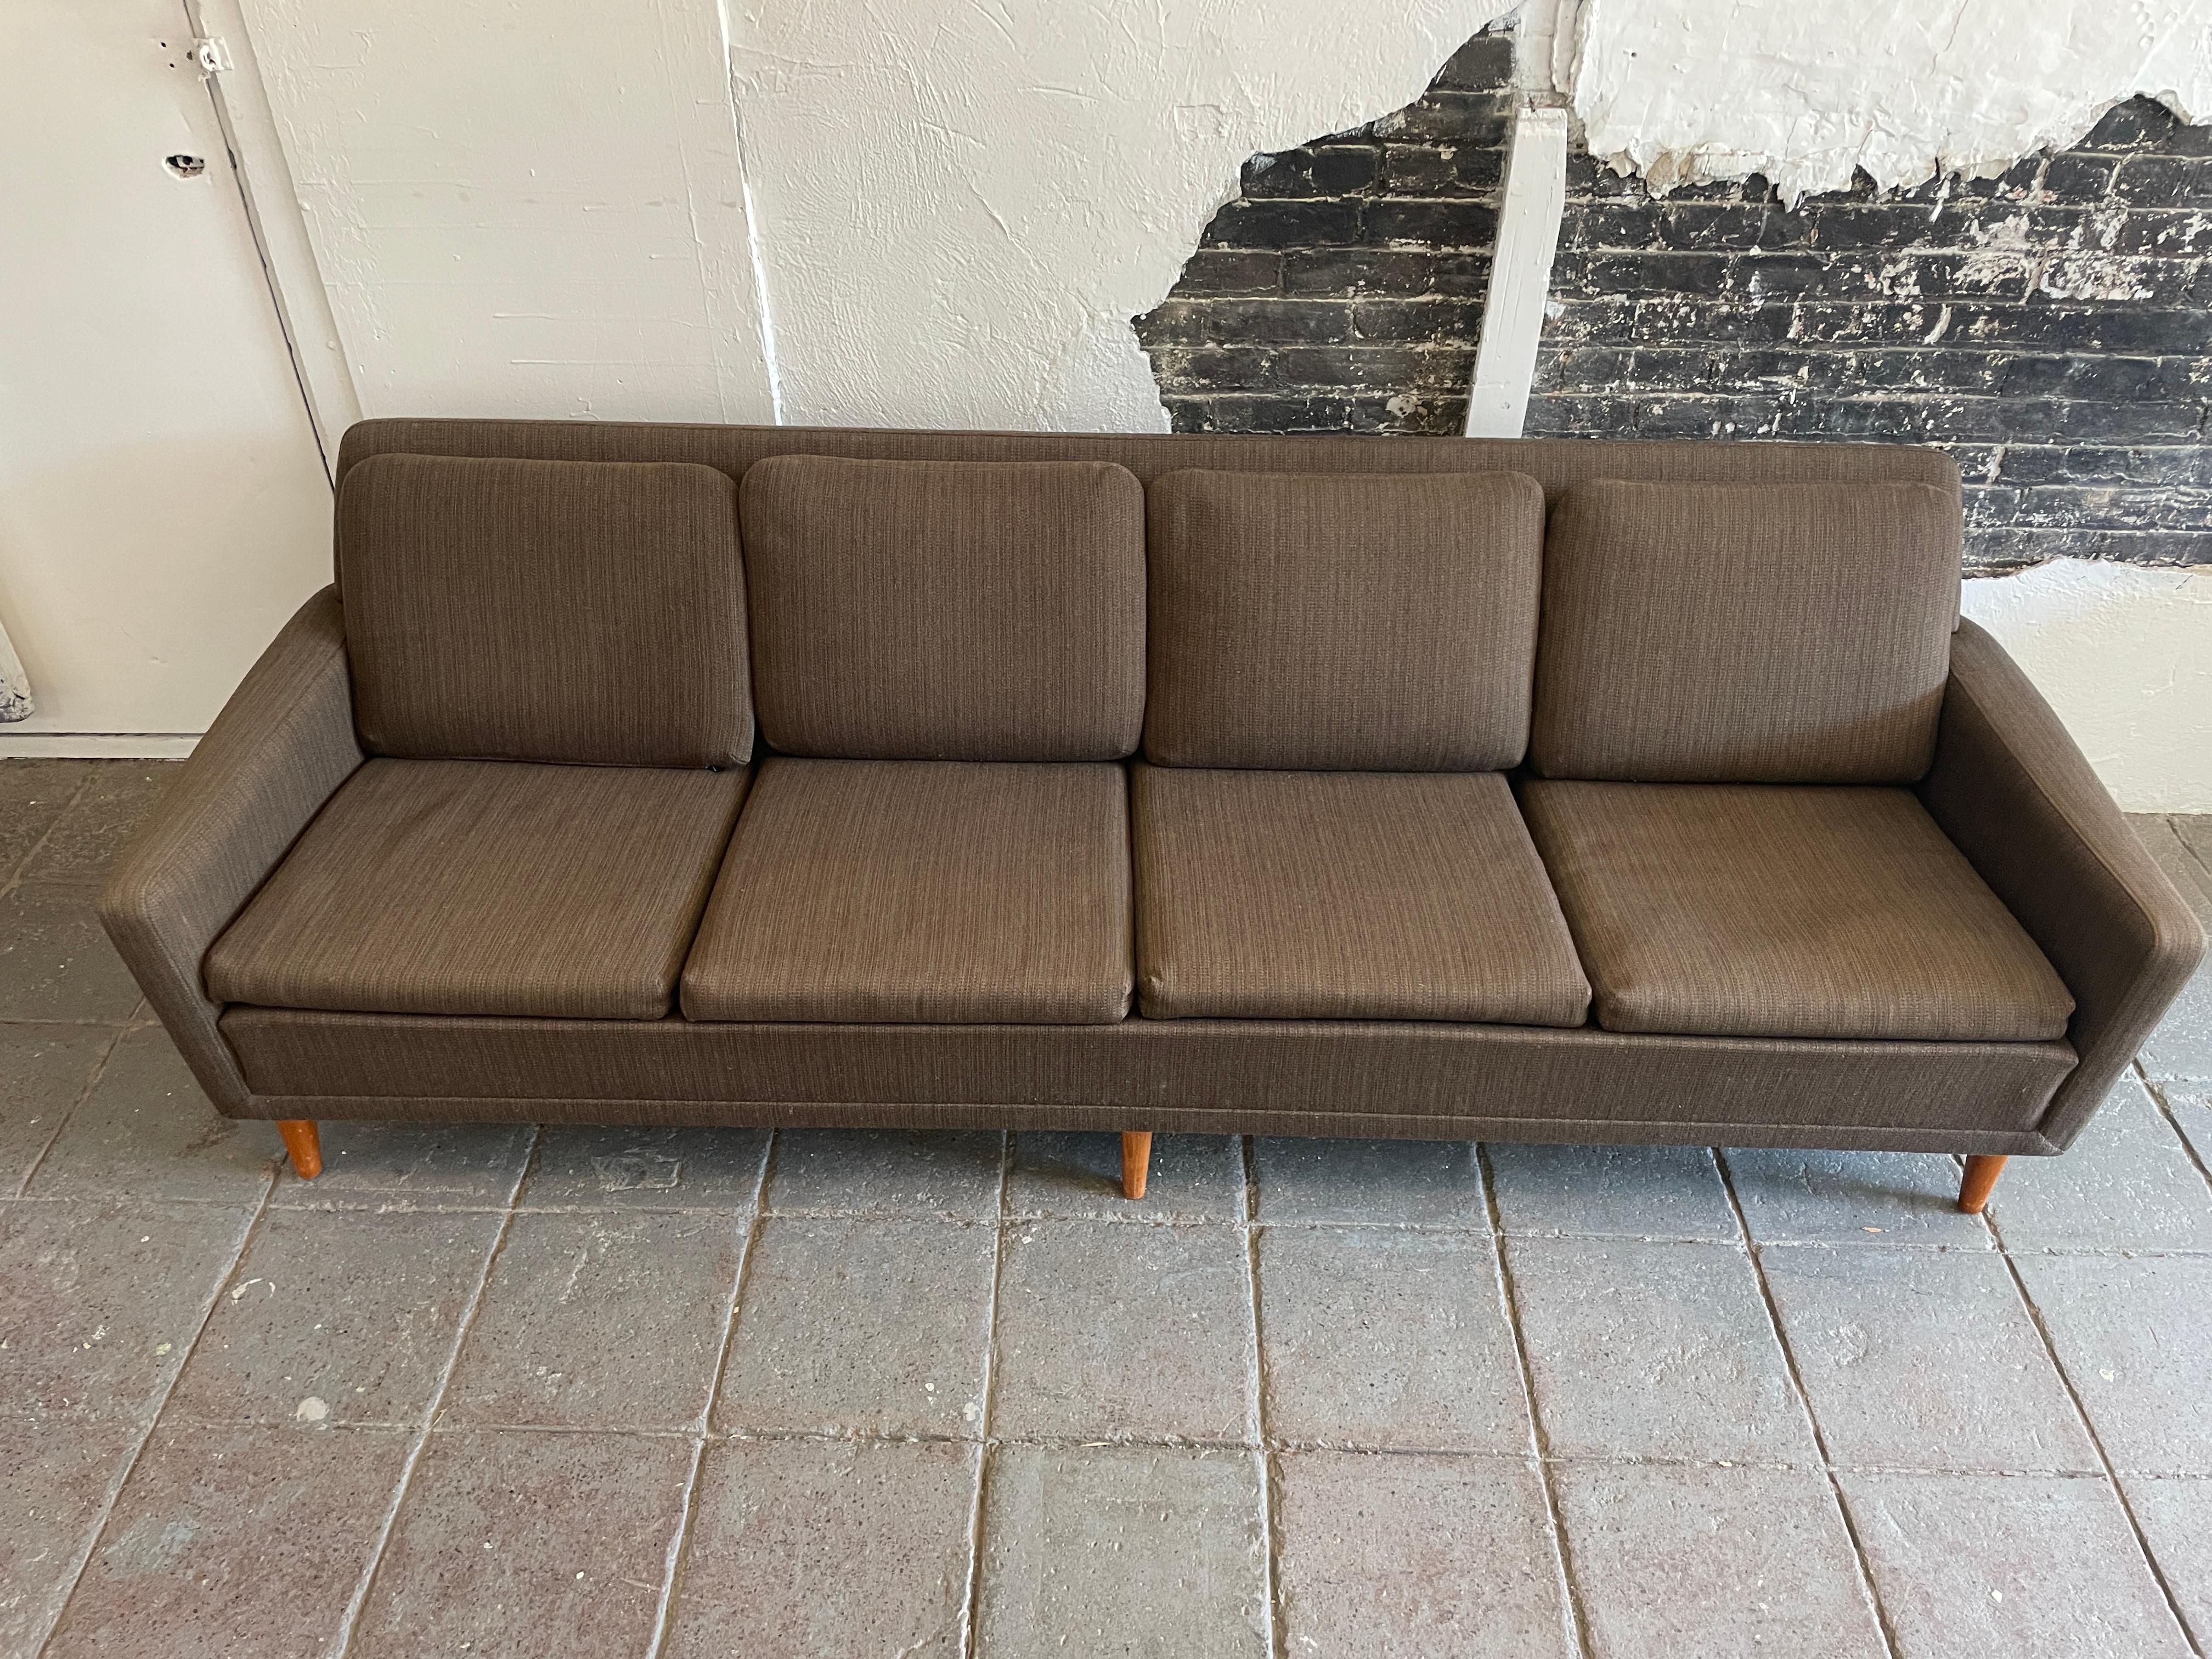 Mid-century Scandinavian Modern low 4 seat low sofa couch by DUX in original Dark Brown woven wool upholstery with solid teak legs. All Original 1960's Upholstery in beautiful condition. Wonderful design and very comfortable. Shows very little wear